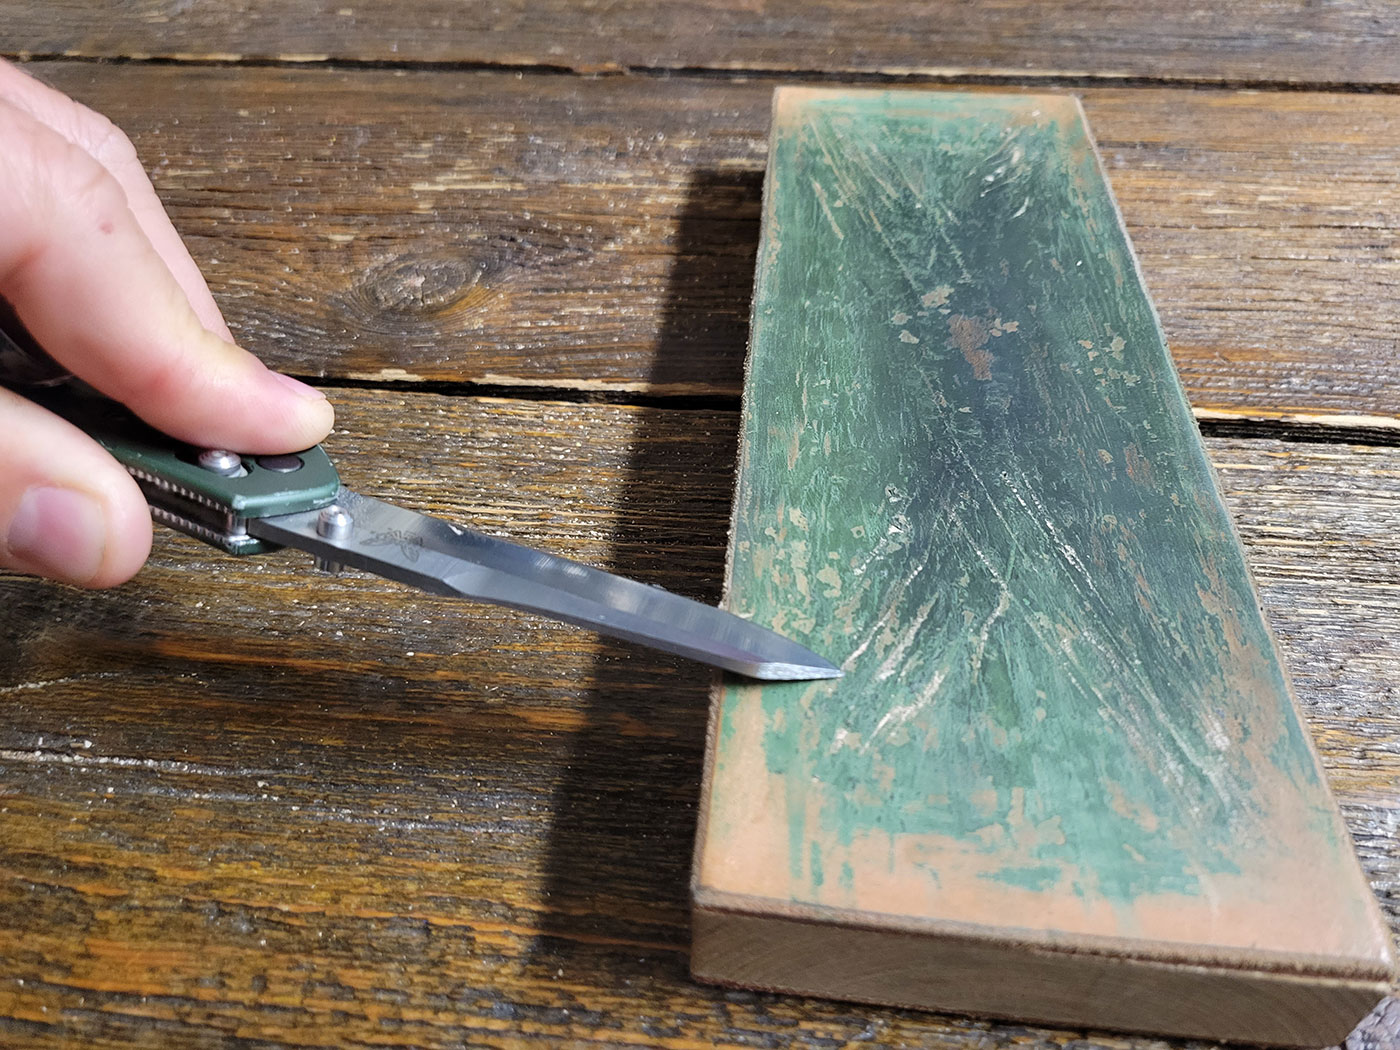 How to Sharpen a Knife the Right Way: 3 DIY Methods